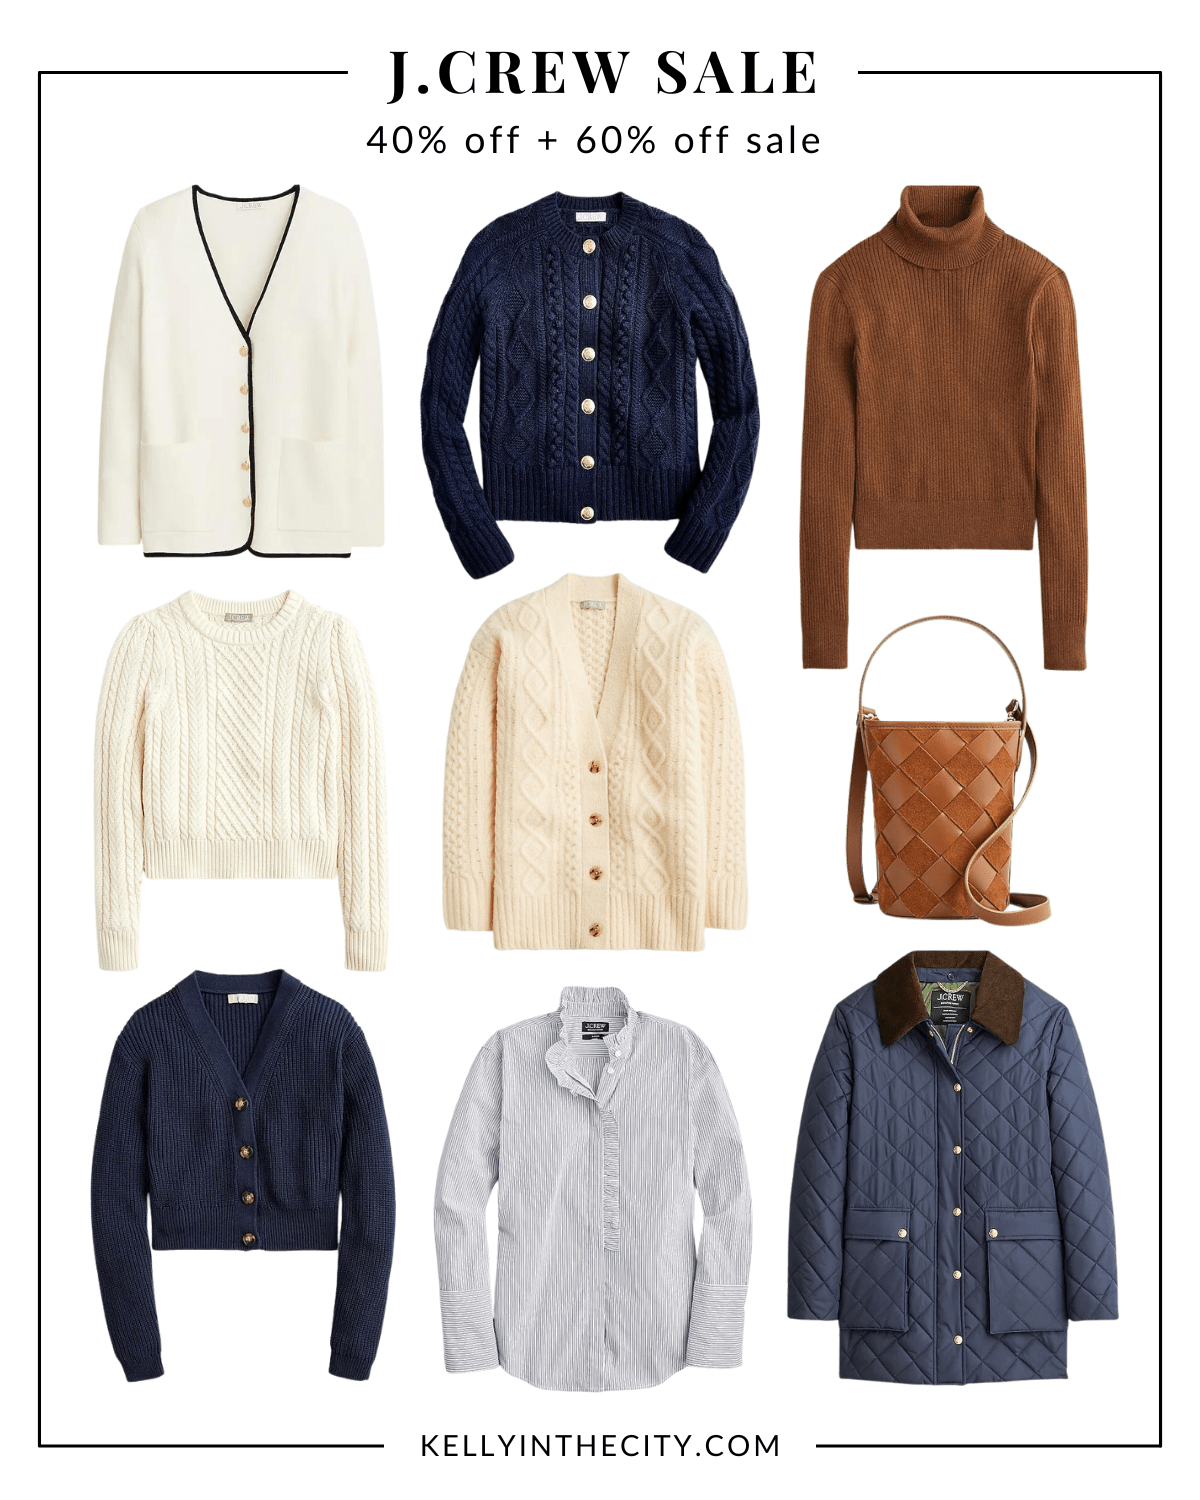 My J.Crew Labor Day Sale favorite picks. From cardigans and sweaters to coats and bags.